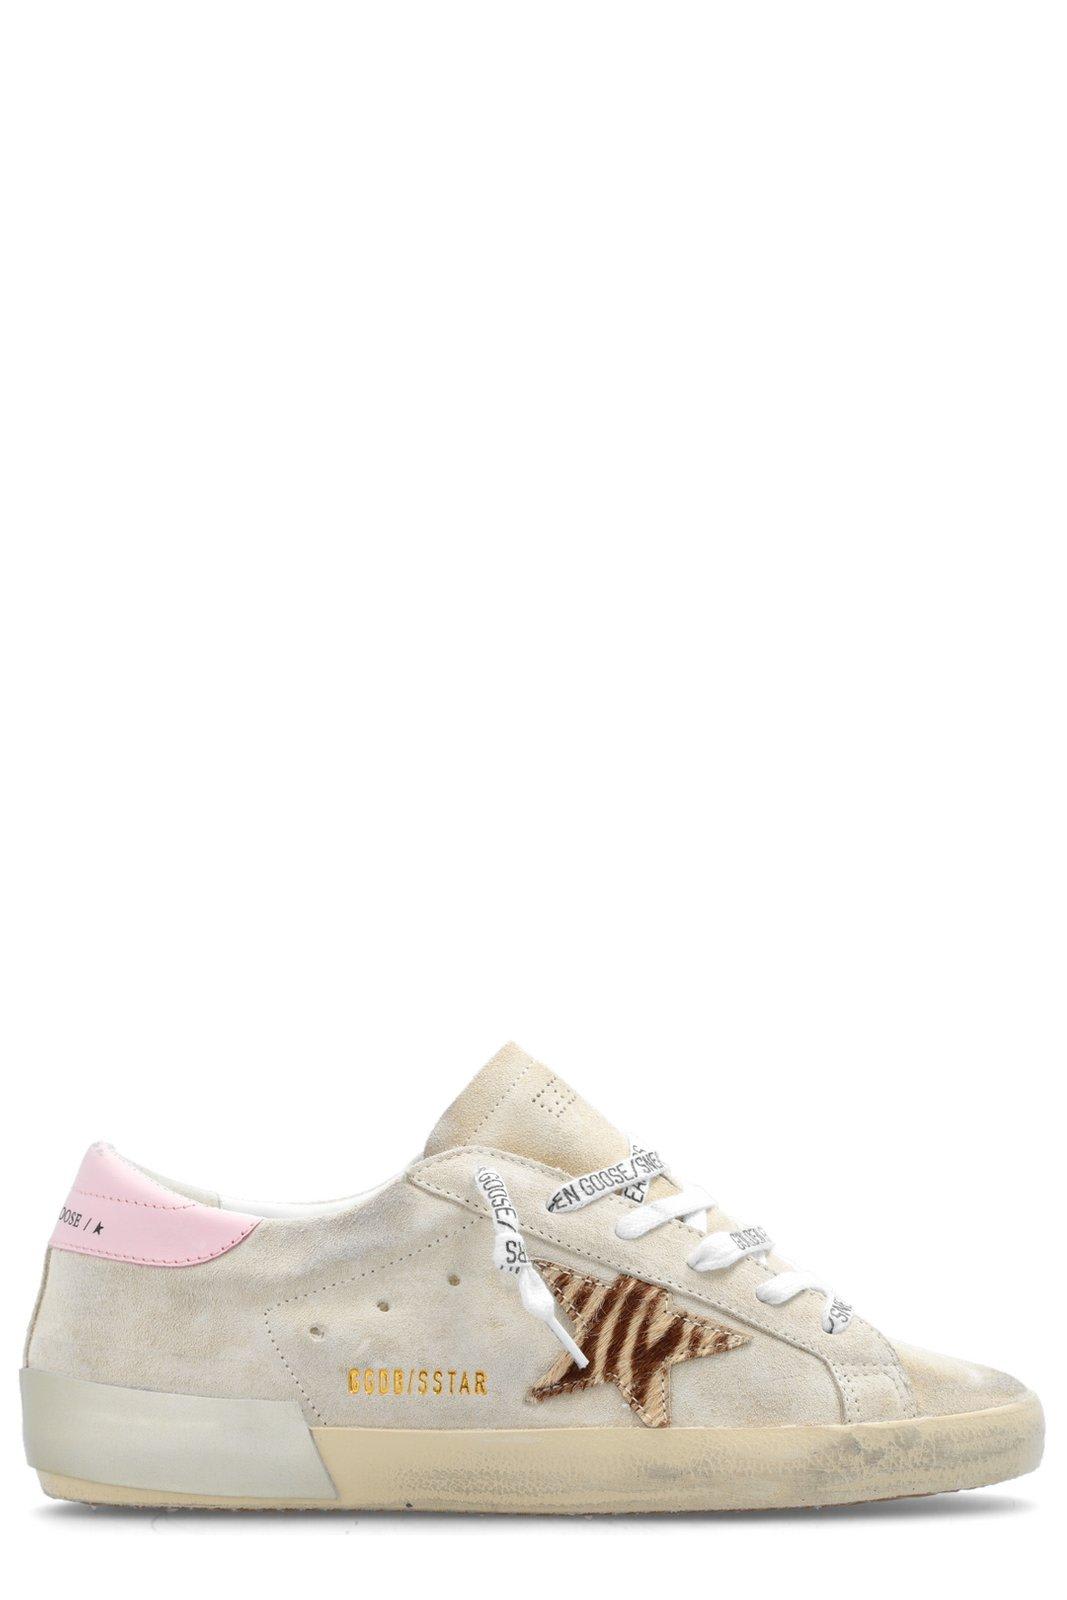 Shop Golden Goose Super-star Classic Sneakers In Butter Brown Orchid Pink